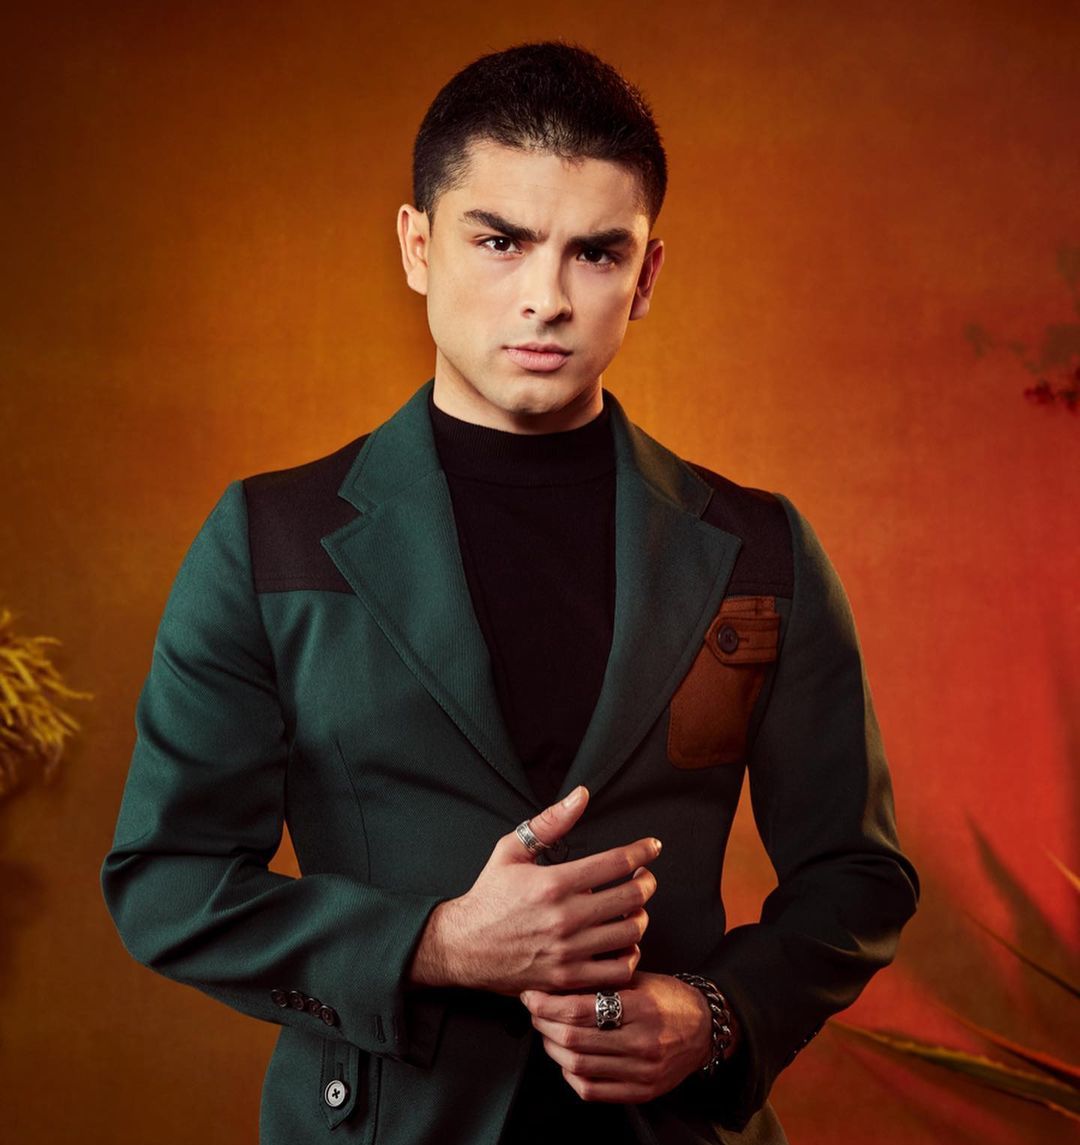 Diego Tinoco wearing a statement suit and posing for a magazine feature